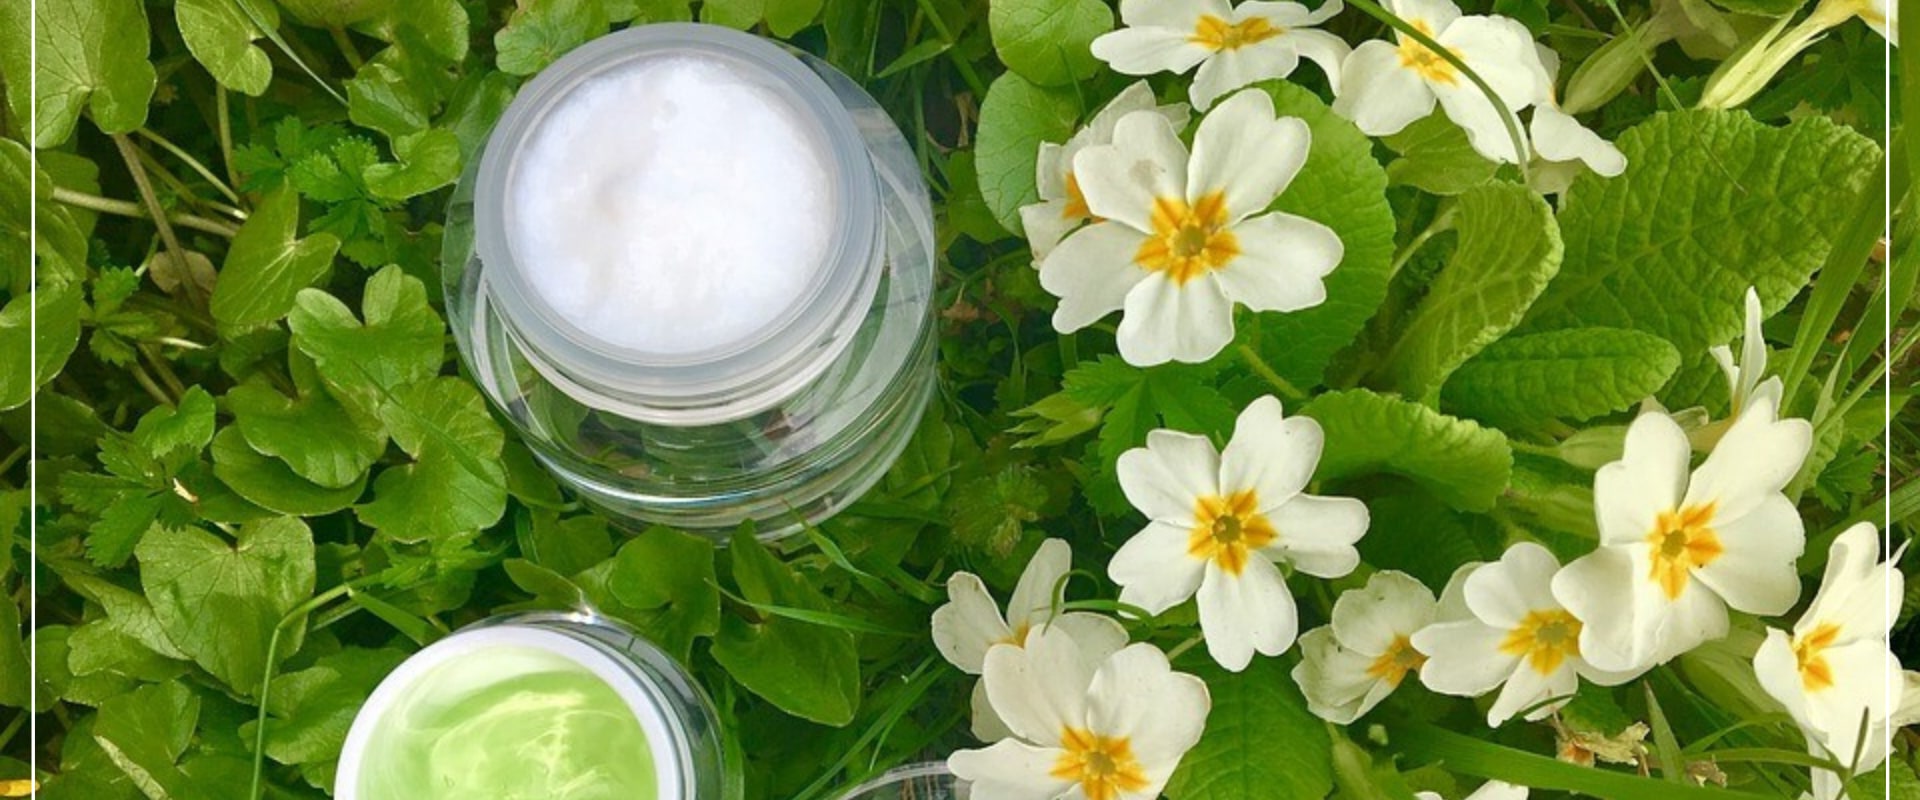 10 Best Natural Skincare Brands for a Healthy Glow